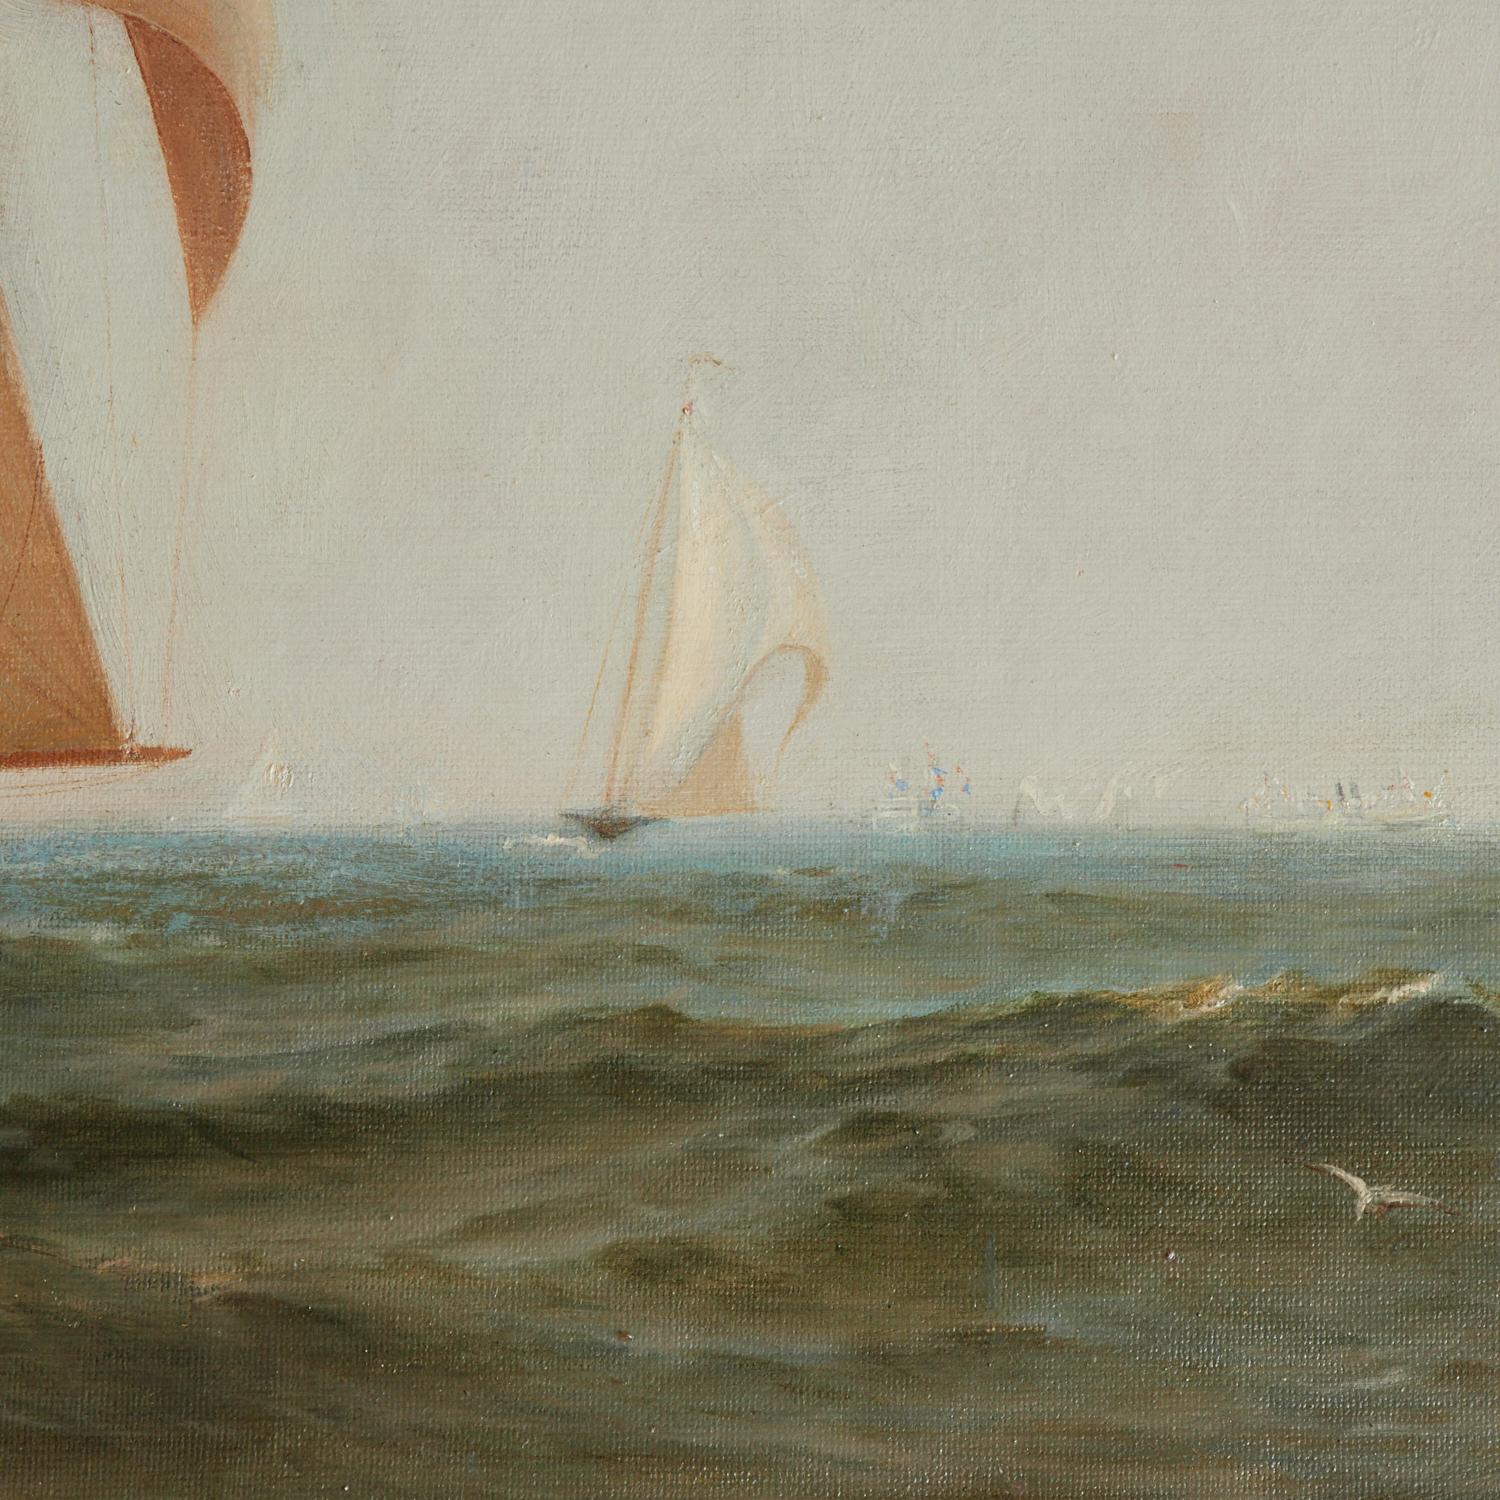 Gilt Antique Signed Oil on Canvas Warren W. Sheppard, Likely an America's Cup Race  For Sale